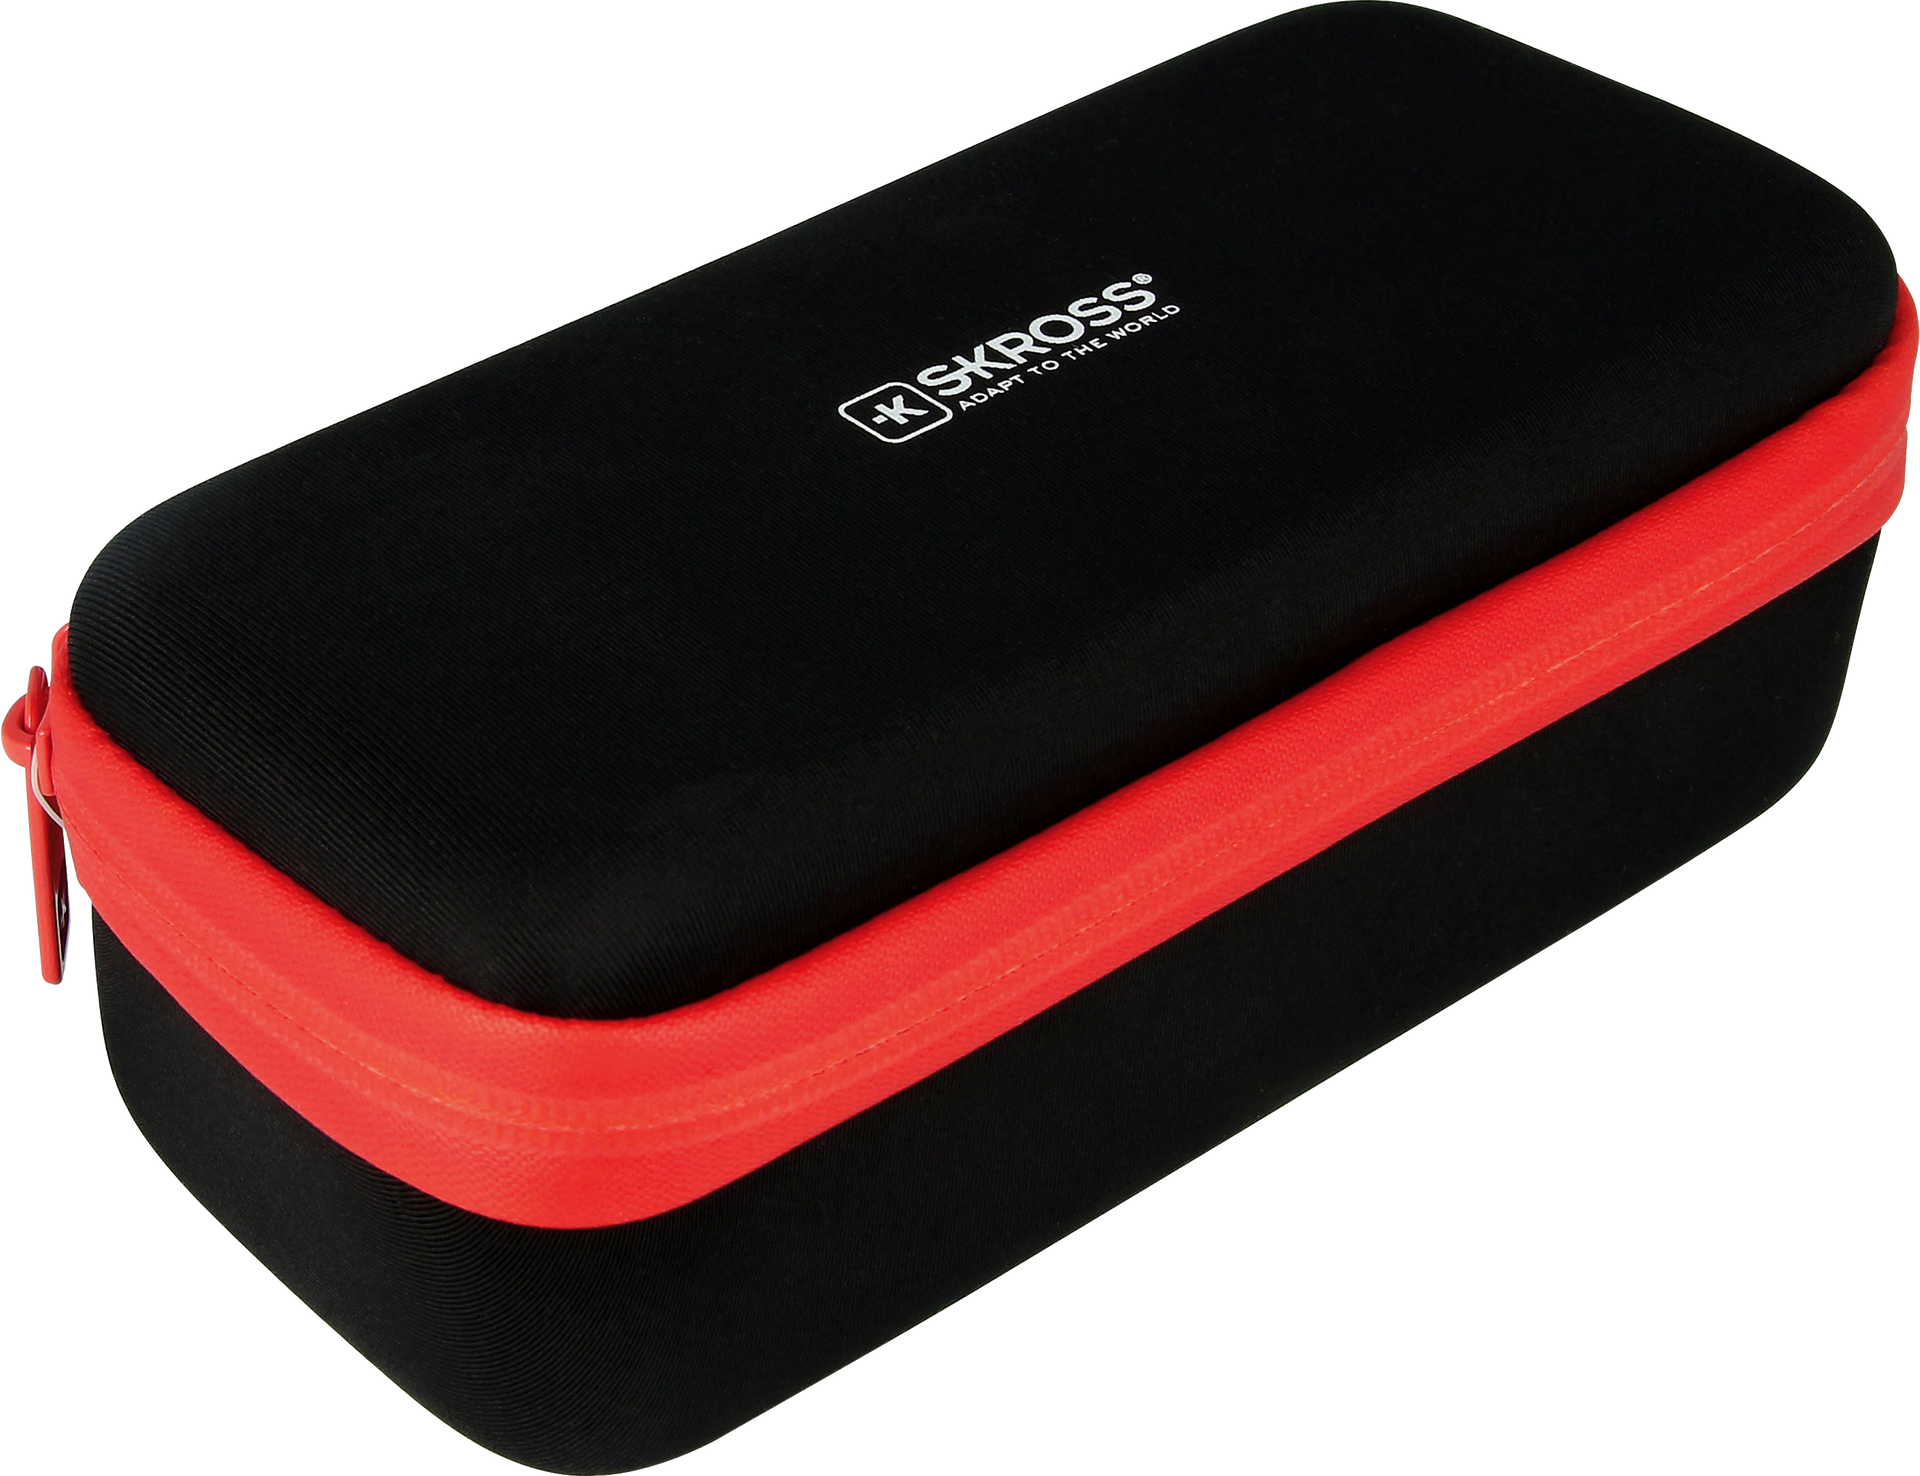 Skross Power case with you logo here